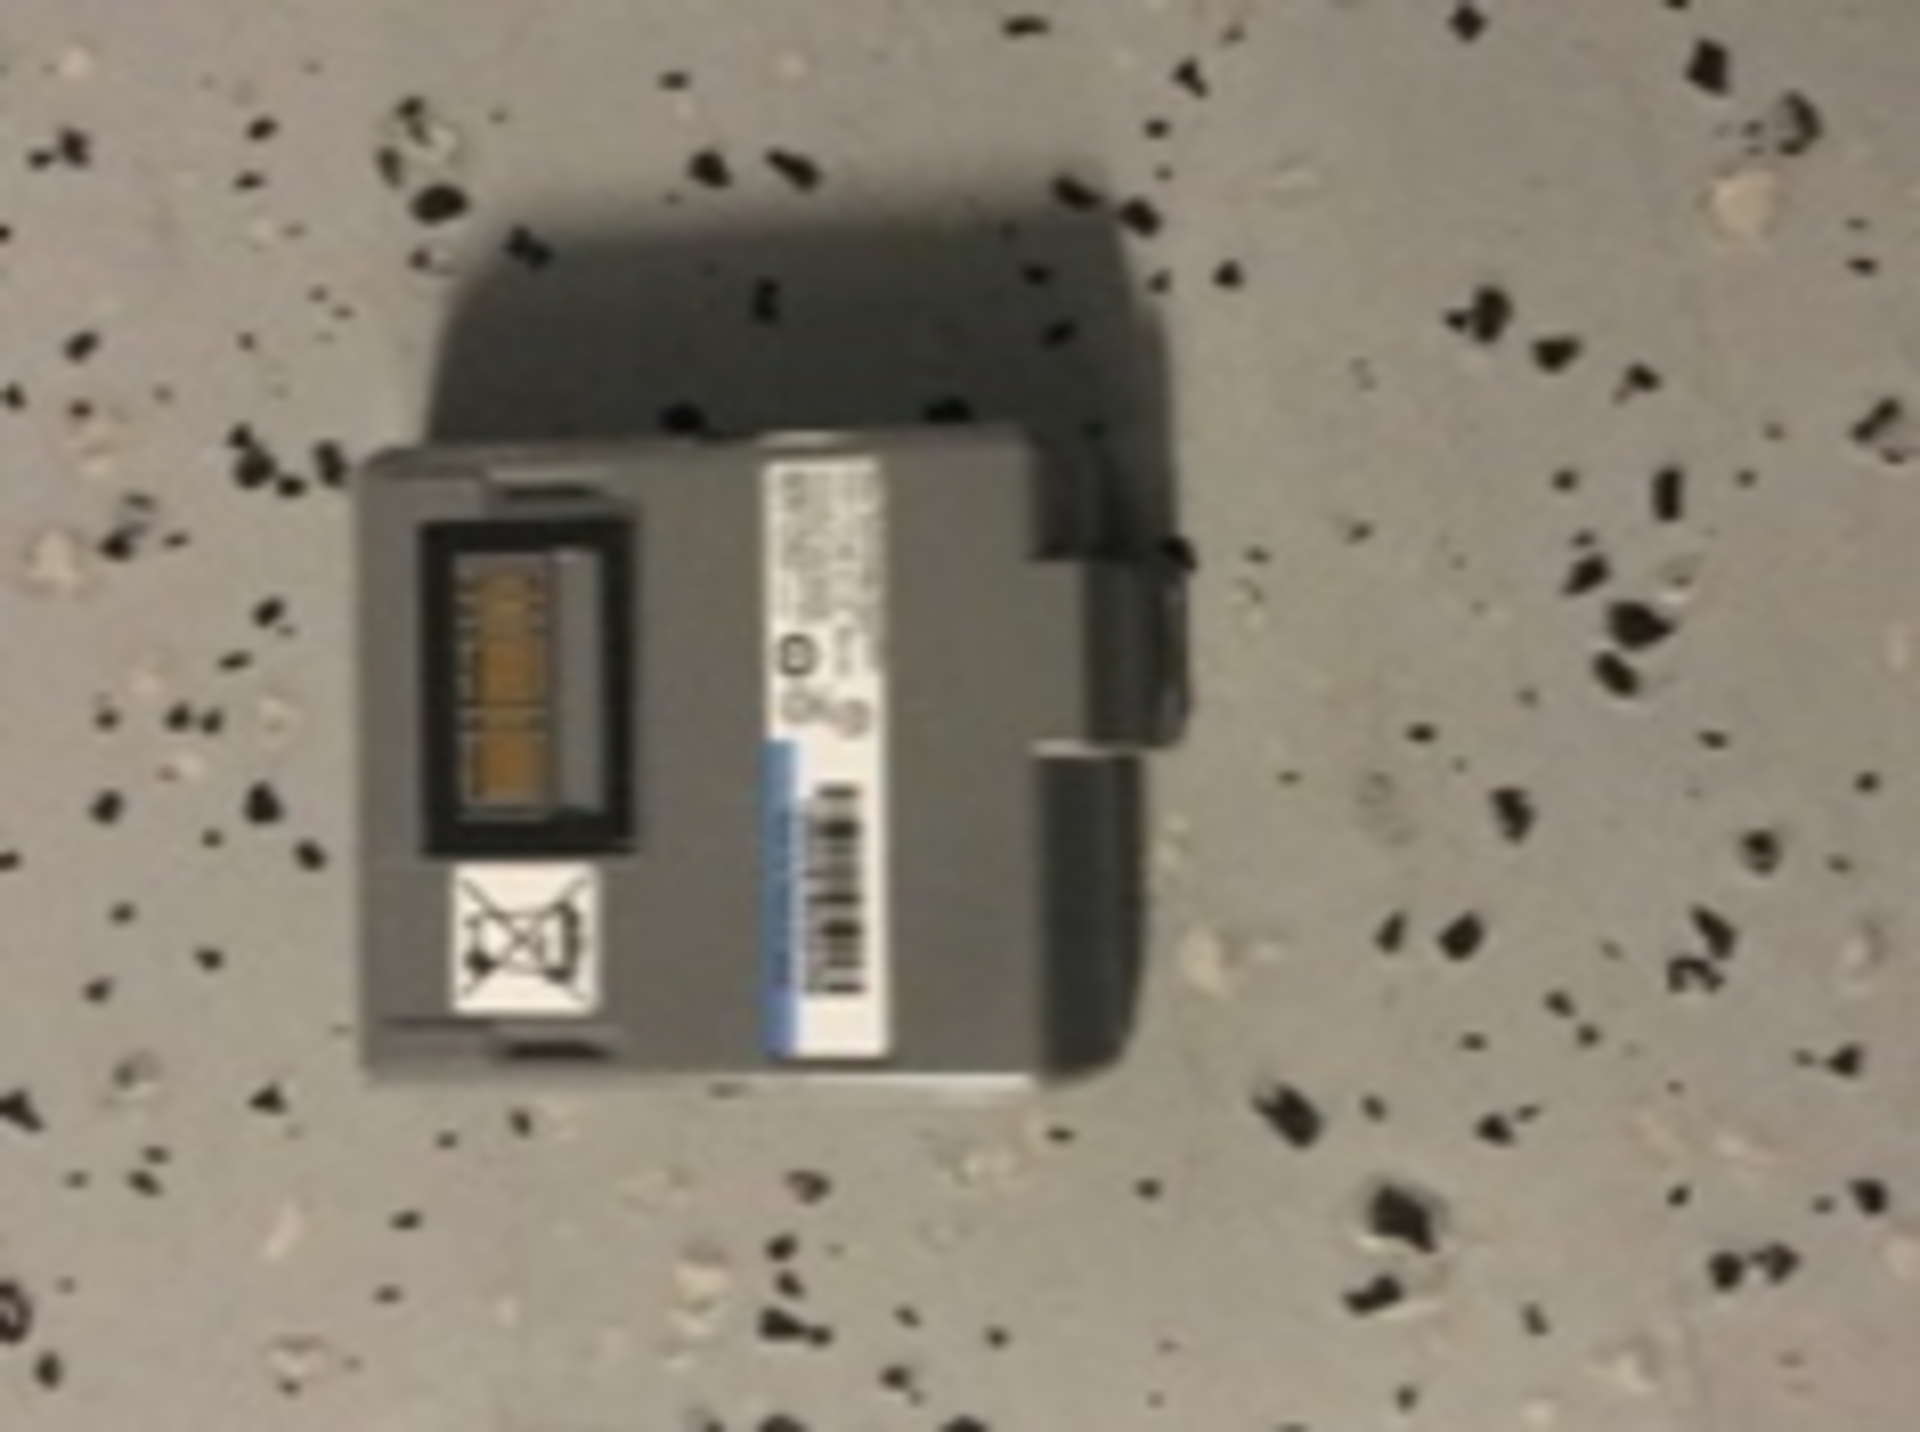 FF&E: LOT OF: 126 qty: Equipment Battery for the Zebra RW420 Mobile Printer Located: East Turnaround